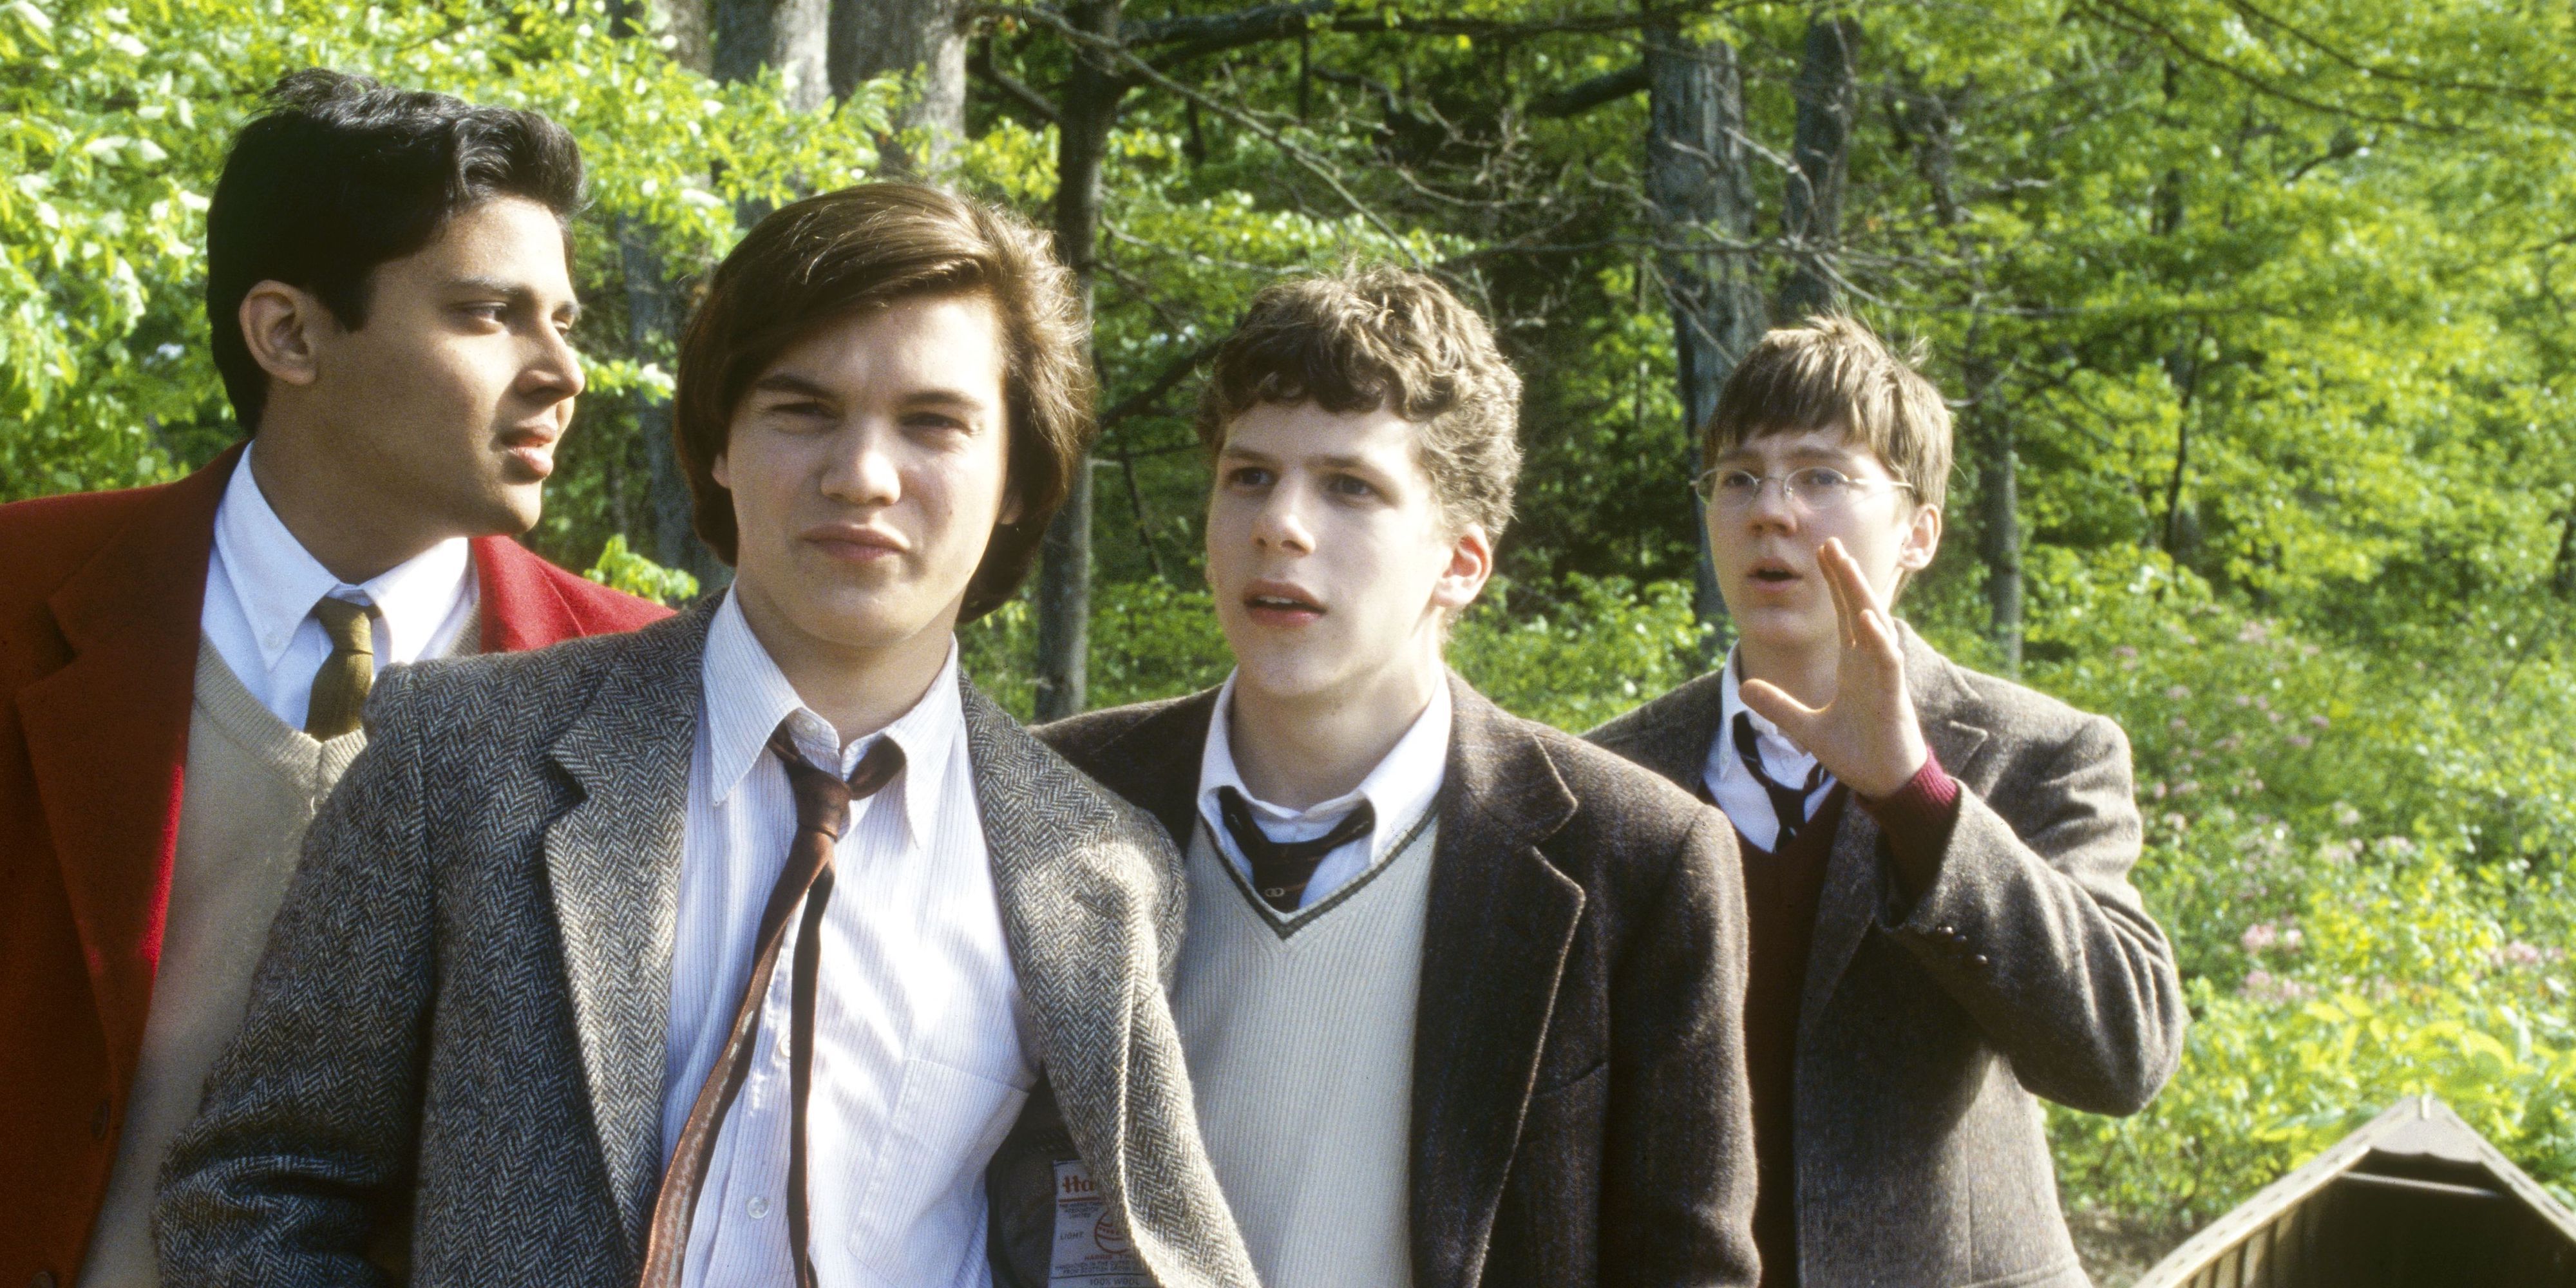 Paul Dano with Jesse Eisenberg in The Emperors Club